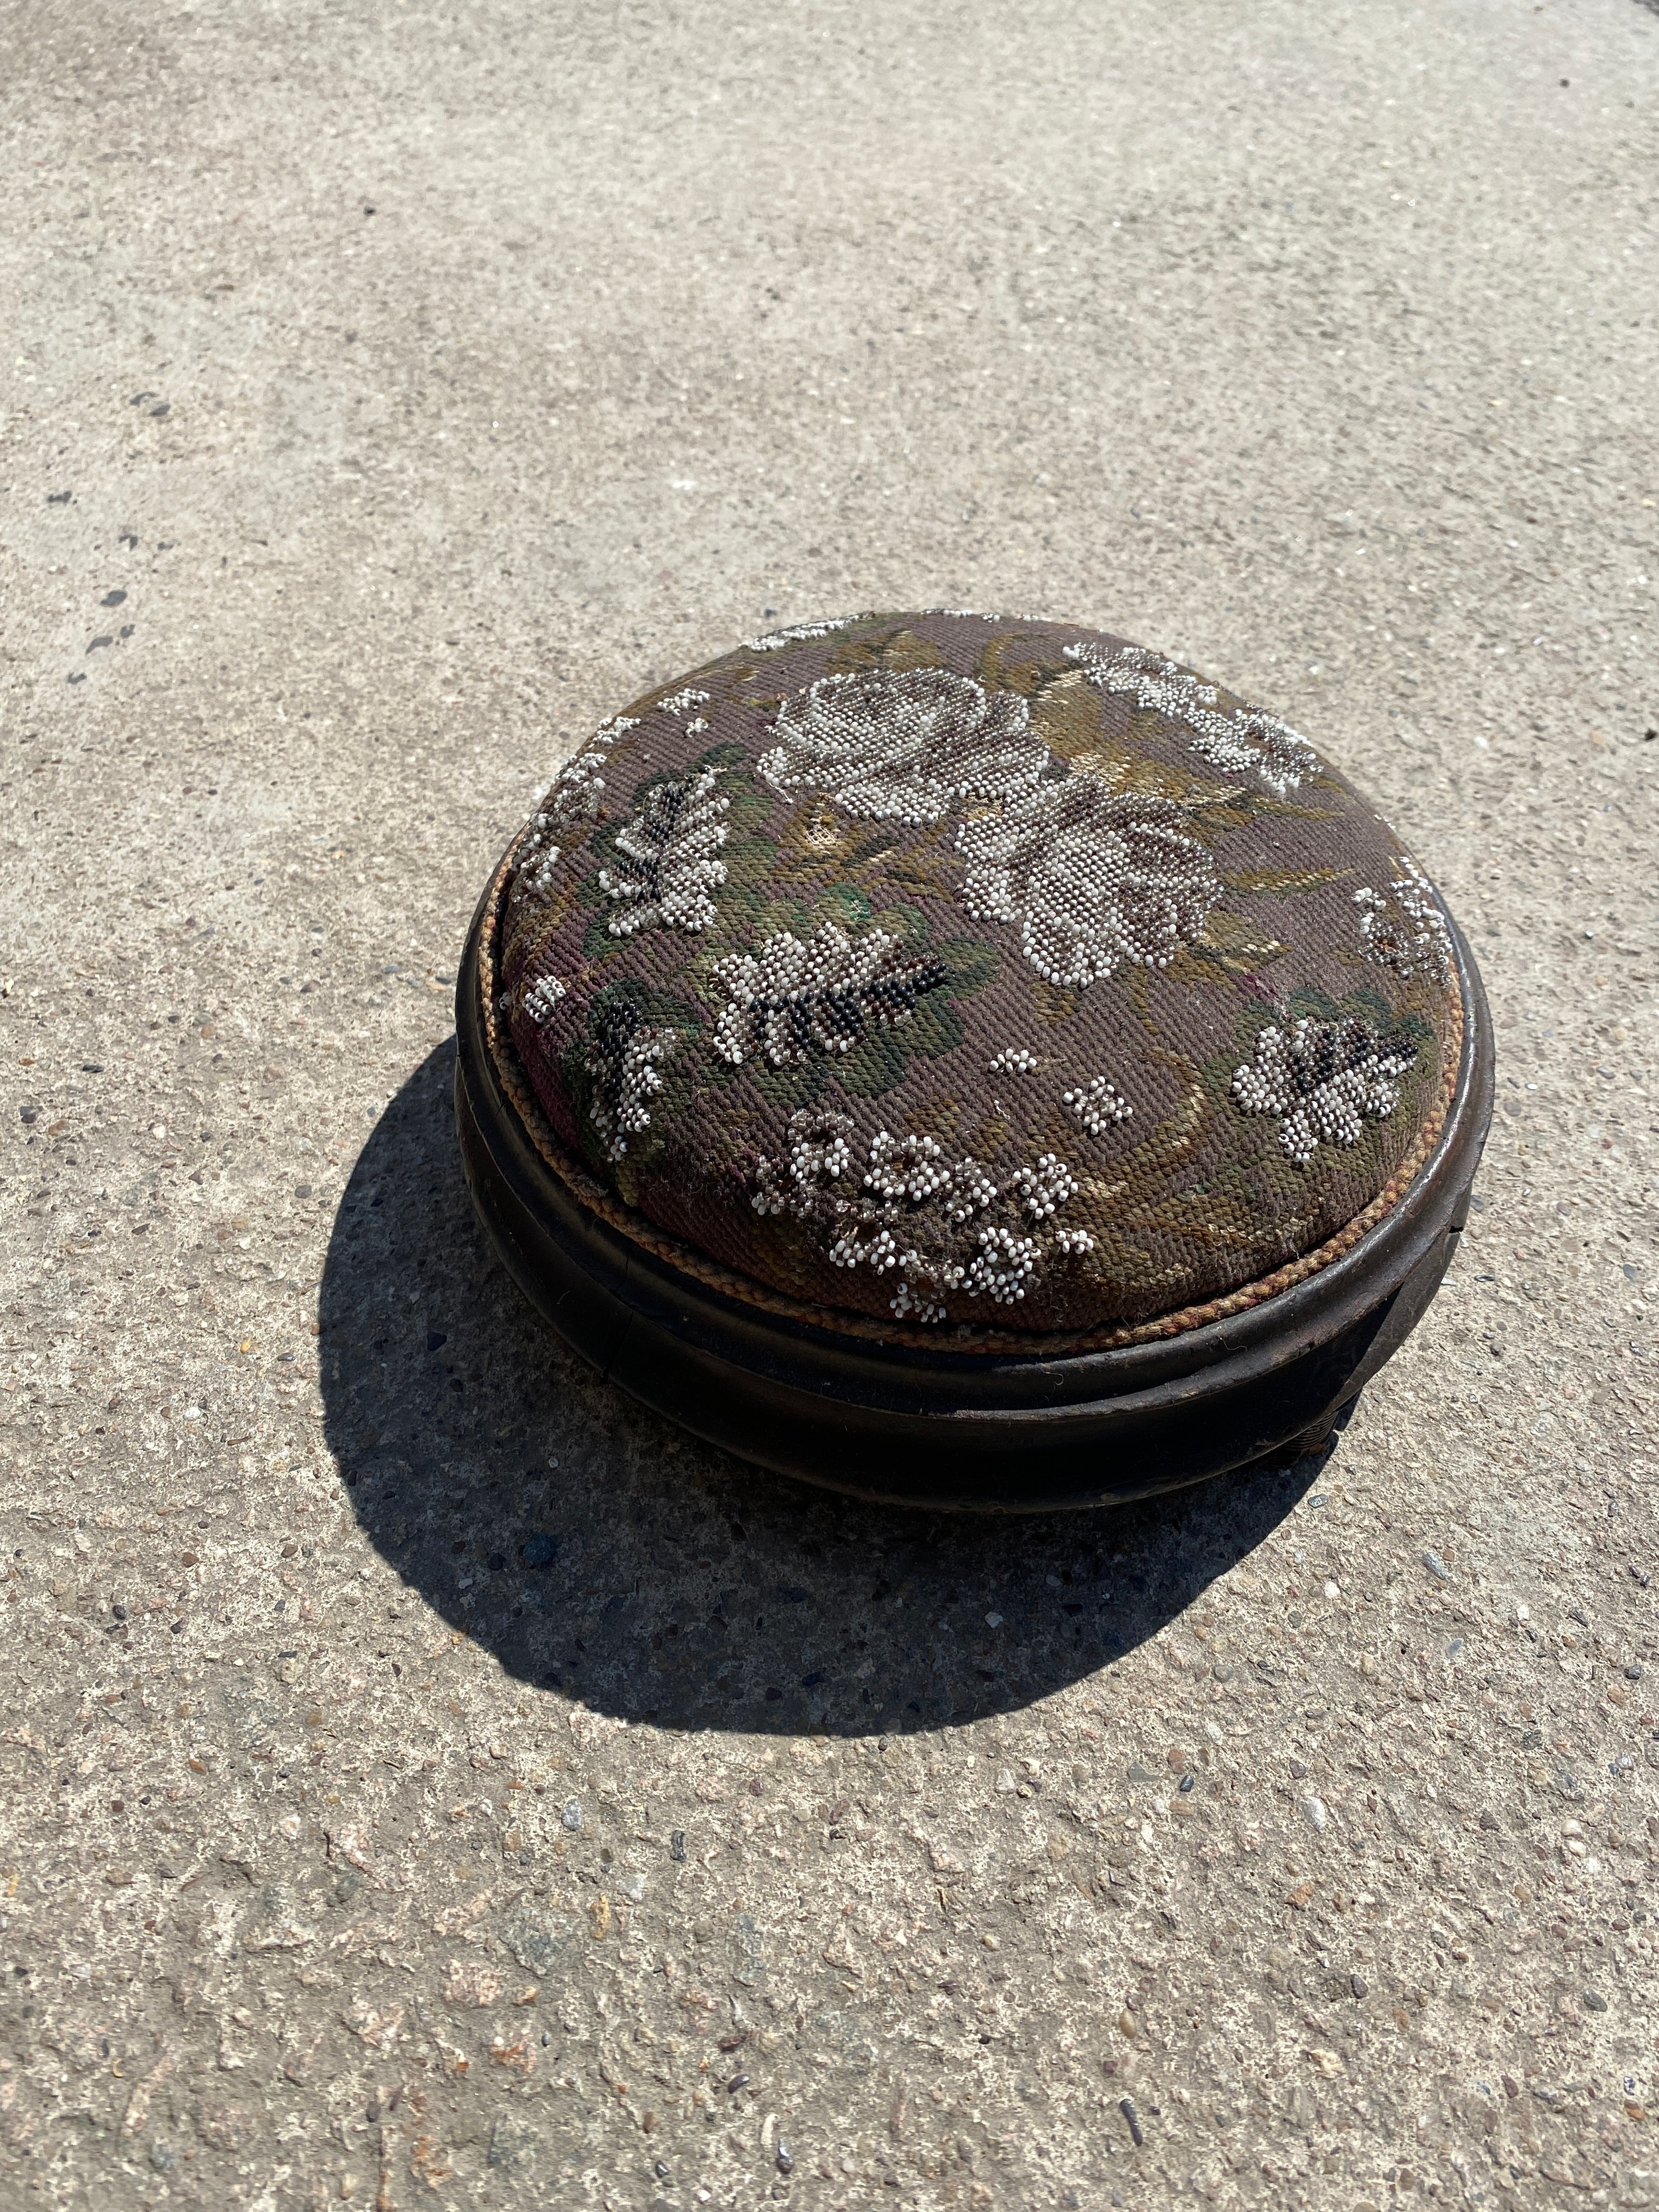 Vintage embroided prayer stool - Image 3 of 3